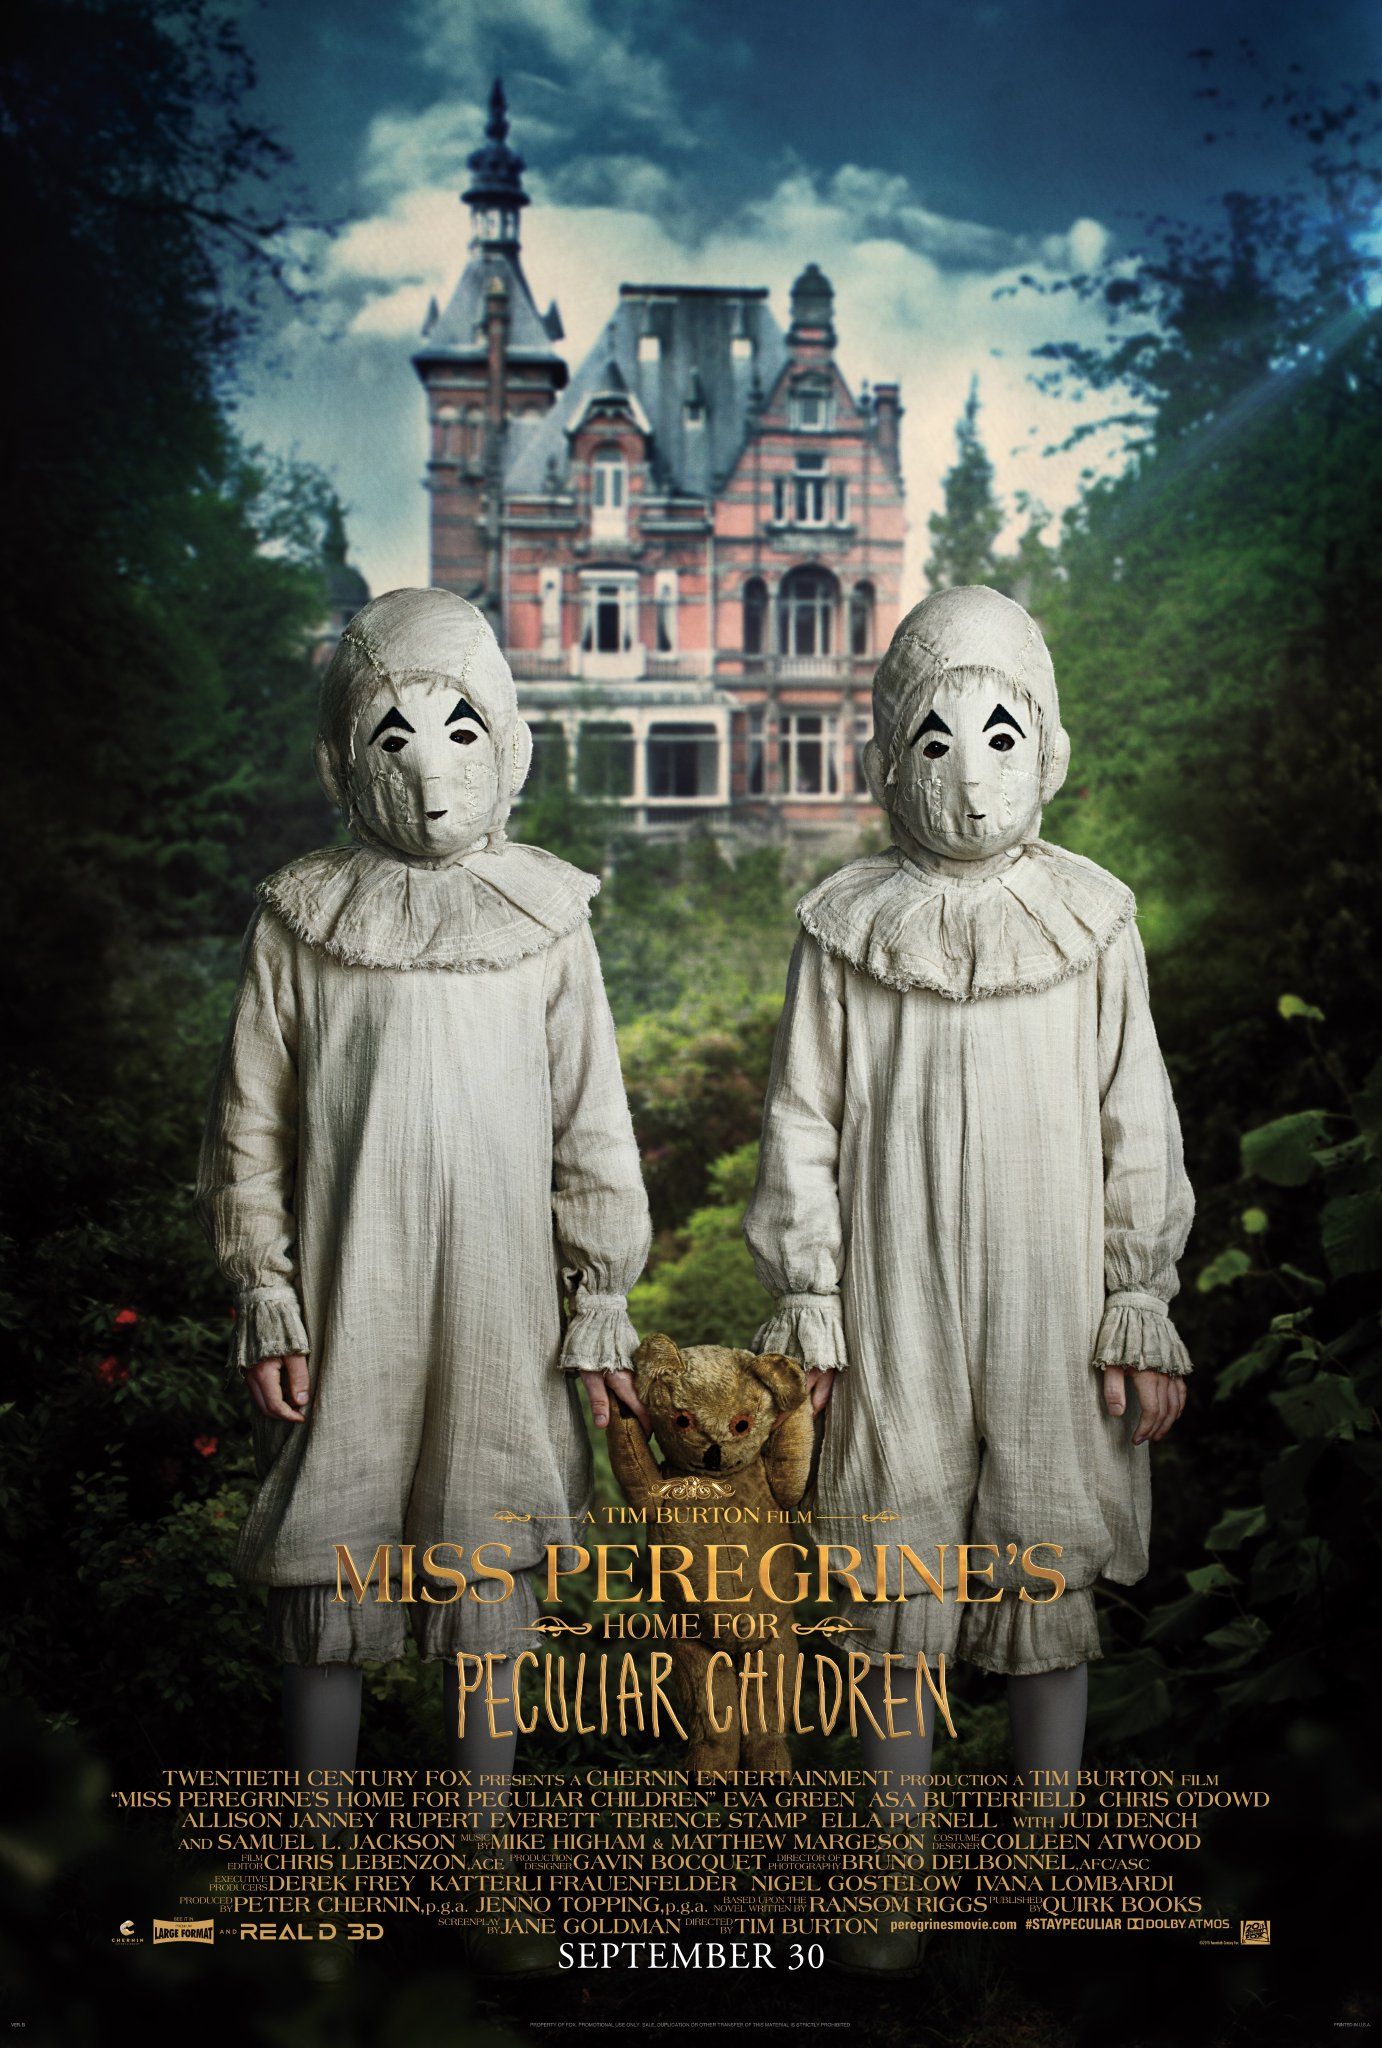 miss-peregrines-home-for-peculiar-children-poster-twins.jpg